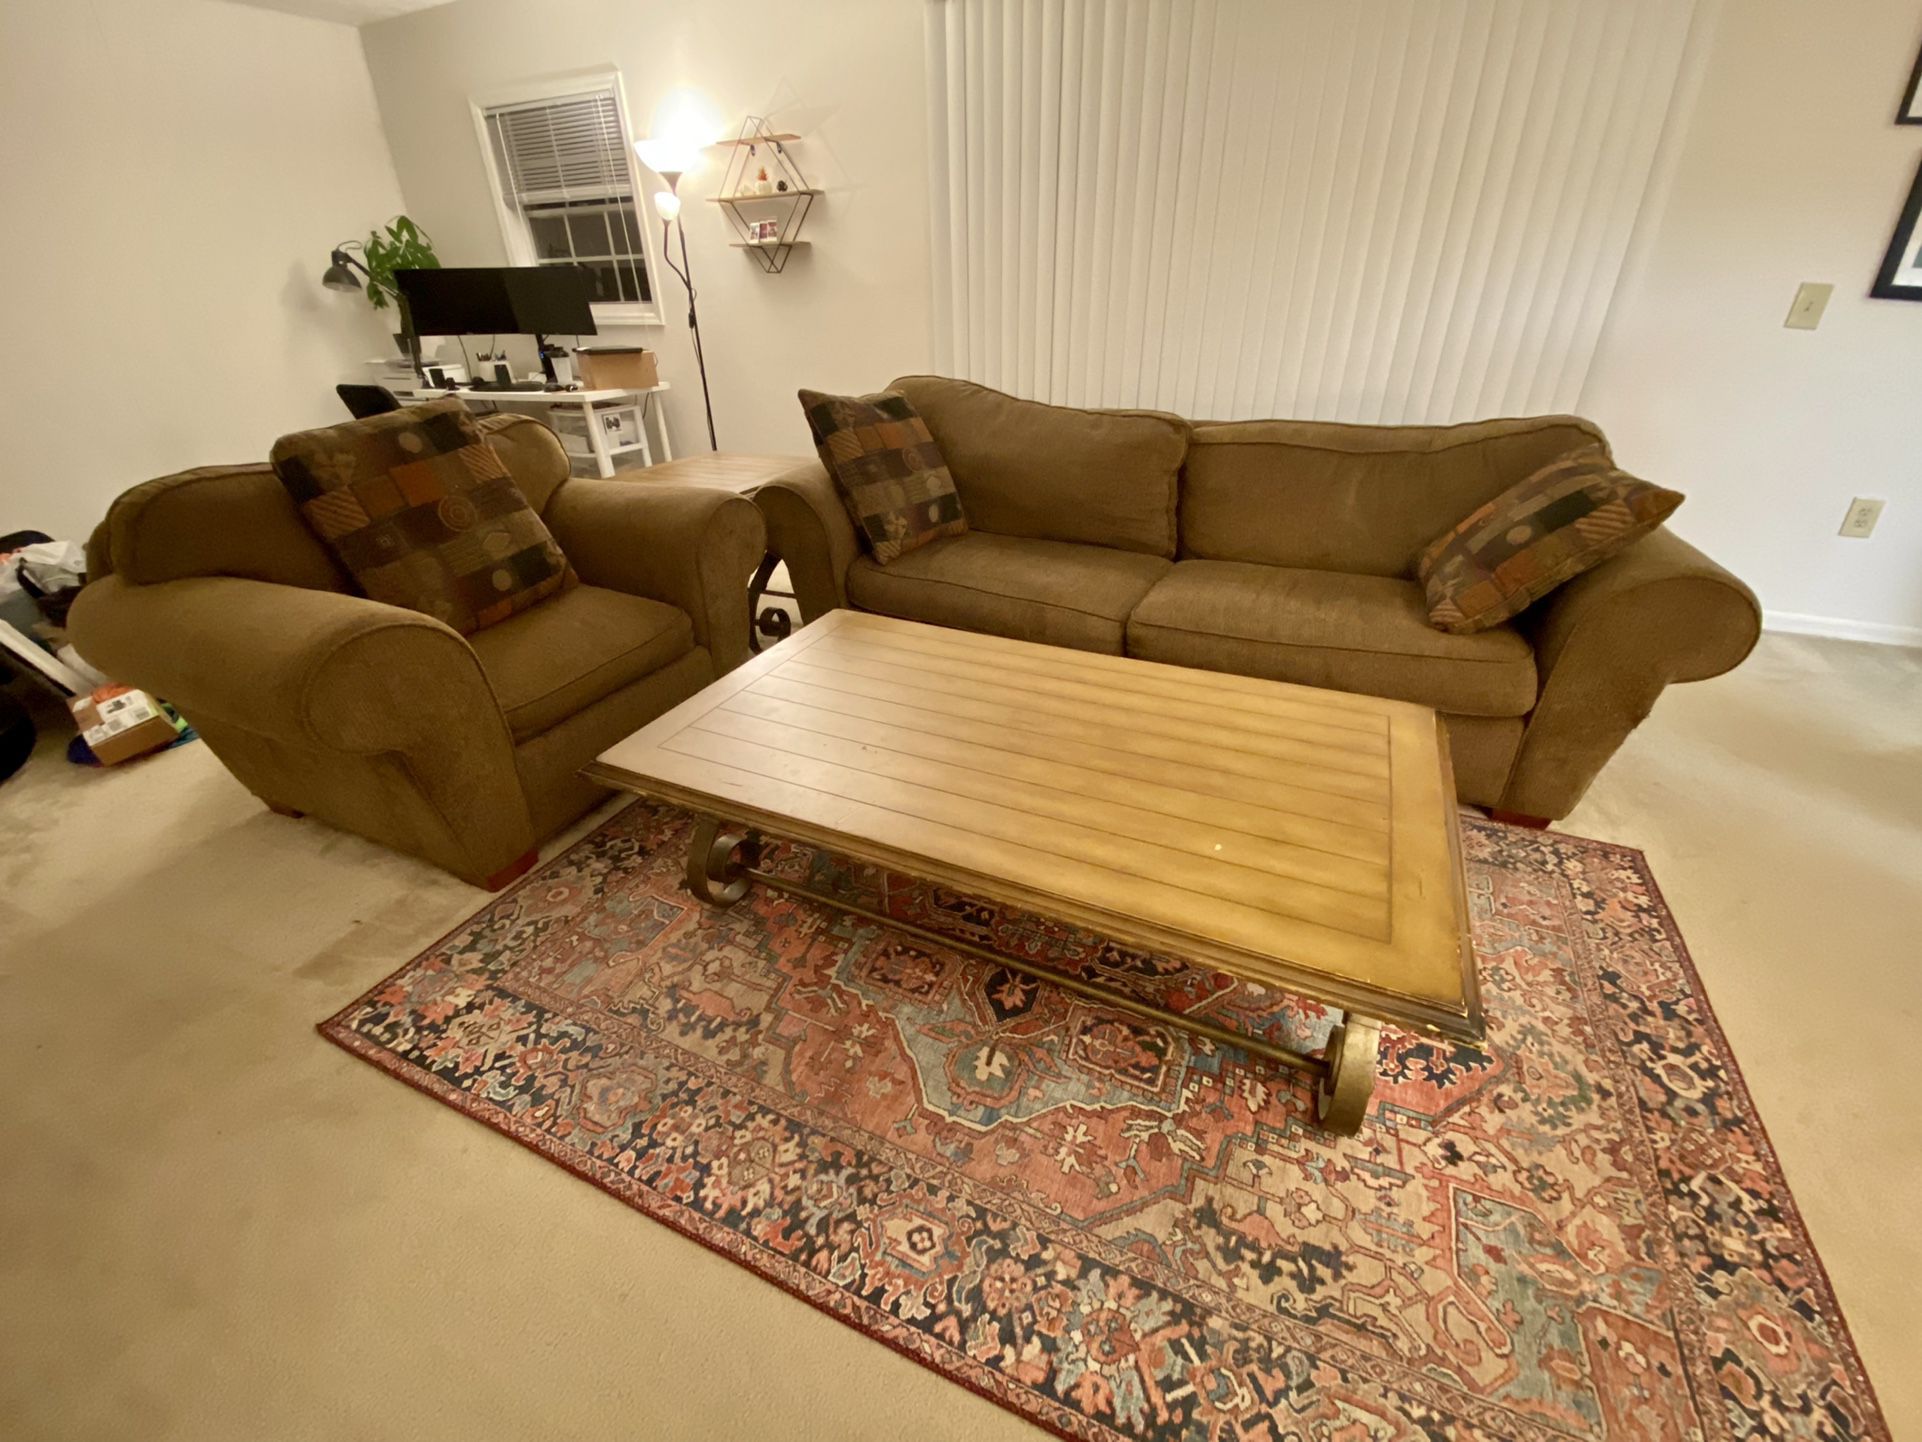 Standard Sofa, Armchair, Coffee Table, & Two Side Tables